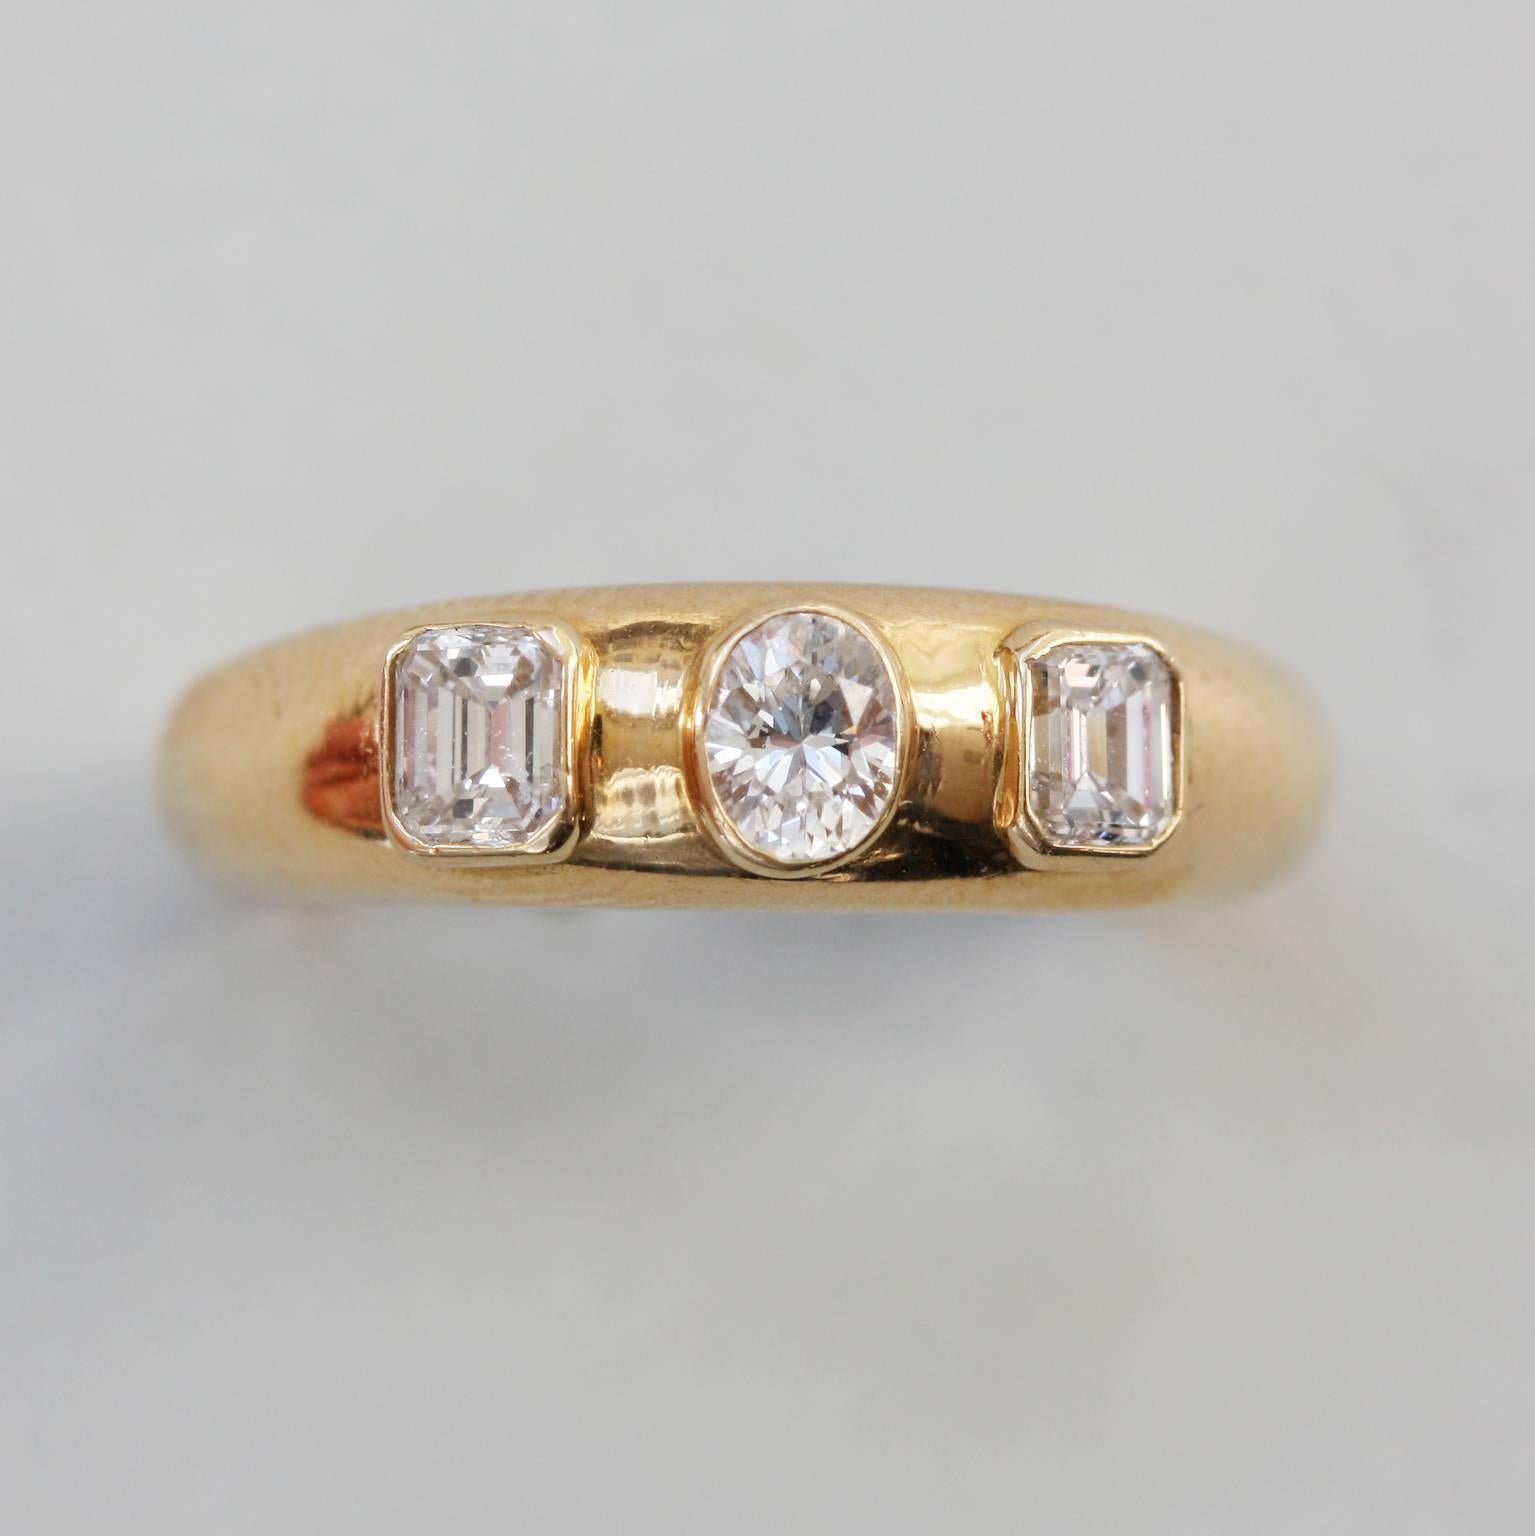 A pretty vintage 18-carat gold band three- stone ring with an oval-cut diamond and two step-cut diamonds (app. F-G, vvs, 0.7 carats). France.

Ring size: 17 mm / 7.5 US
Weight: 4.4 grams